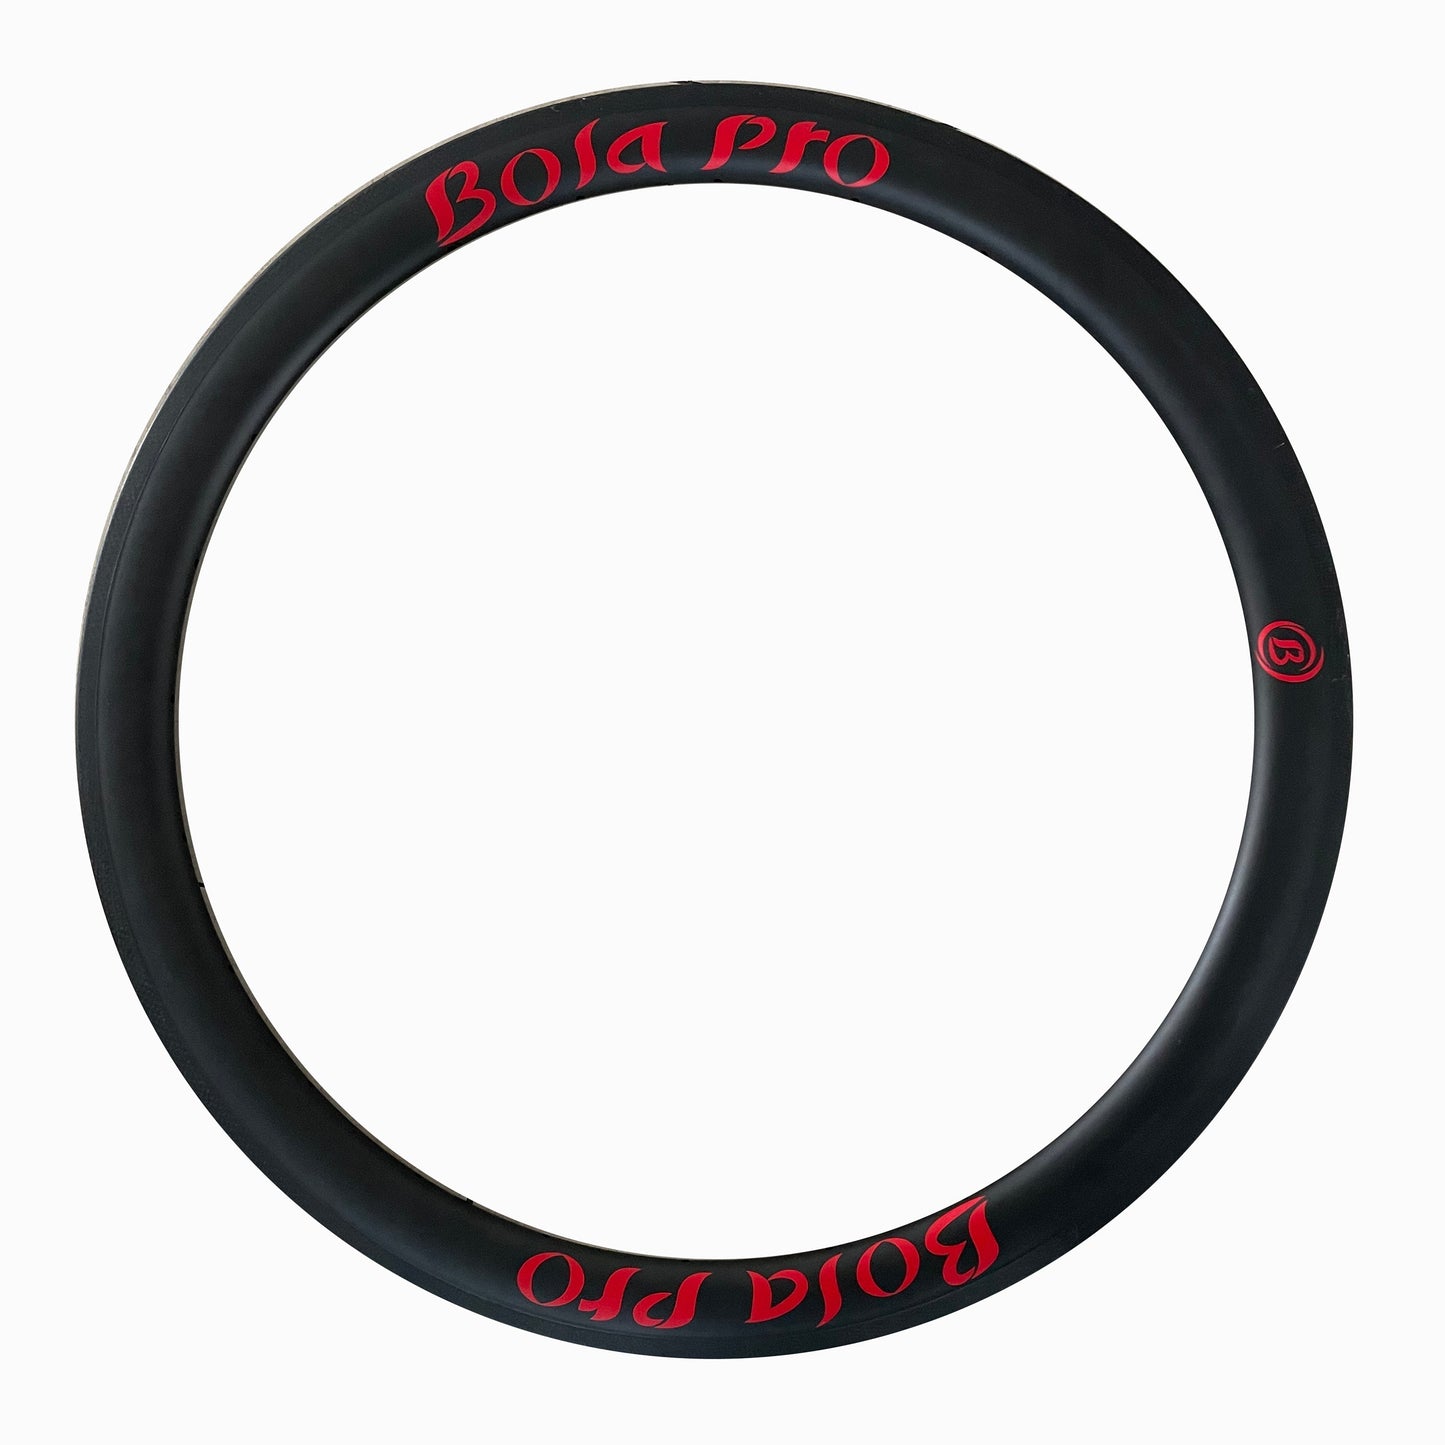 12 inch tubeless carbon hookless bicycle rim 25mm profile 21mm inner wide for Child riding training Bola